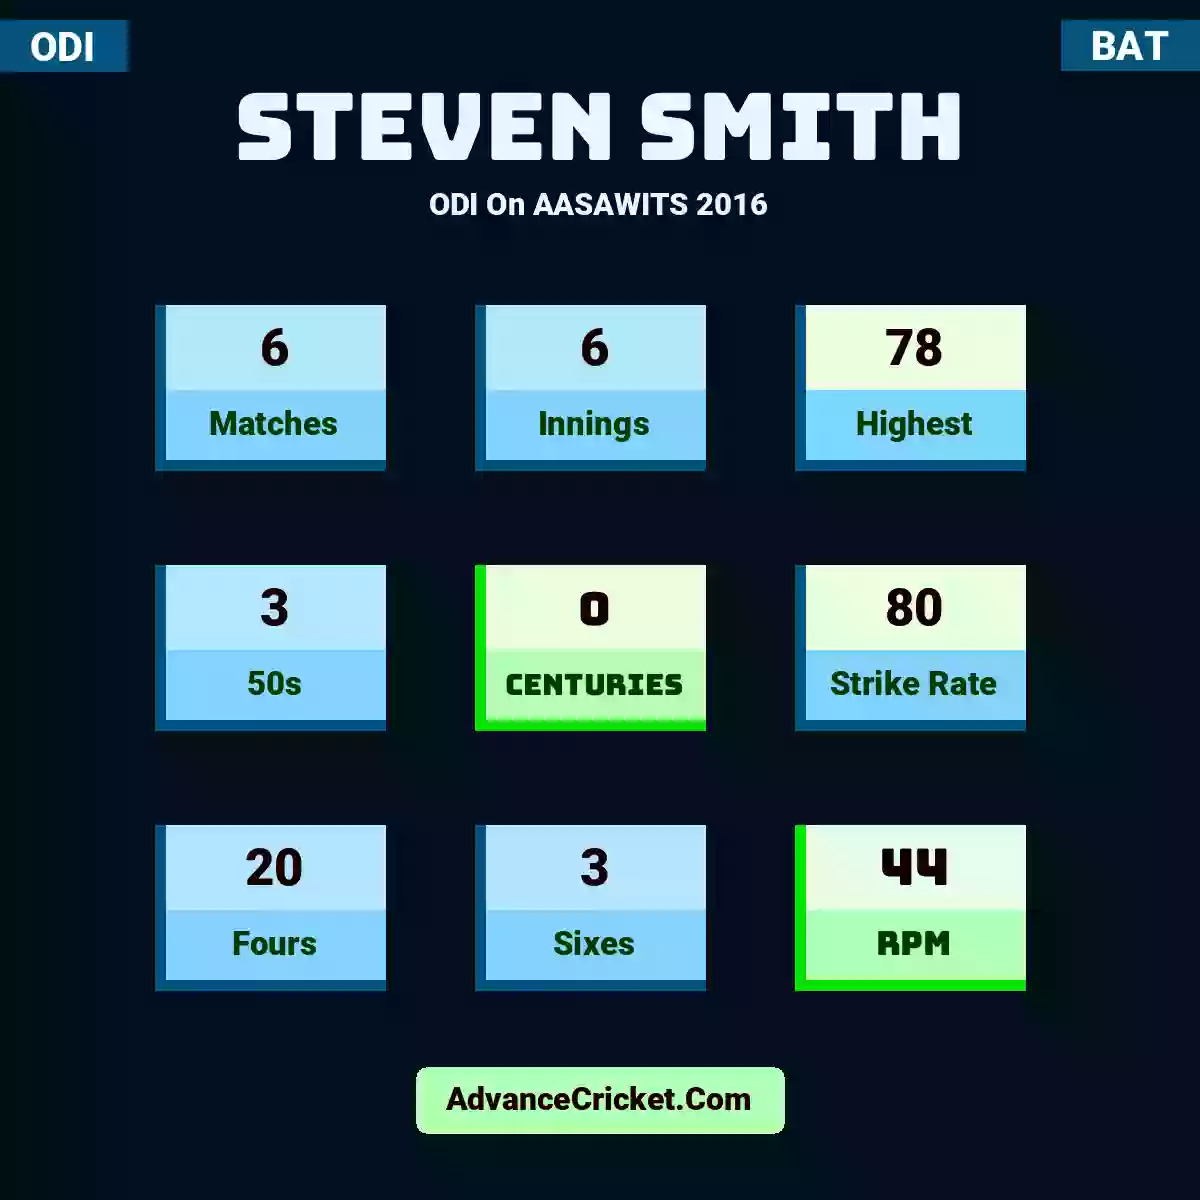 Steven Smith ODI  On AASAWITS 2016, Steven Smith played 6 matches, scored 78 runs as highest, 3 half-centuries, and 0 centuries, with a strike rate of 80. S.Smith hit 20 fours and 3 sixes, with an RPM of 44.